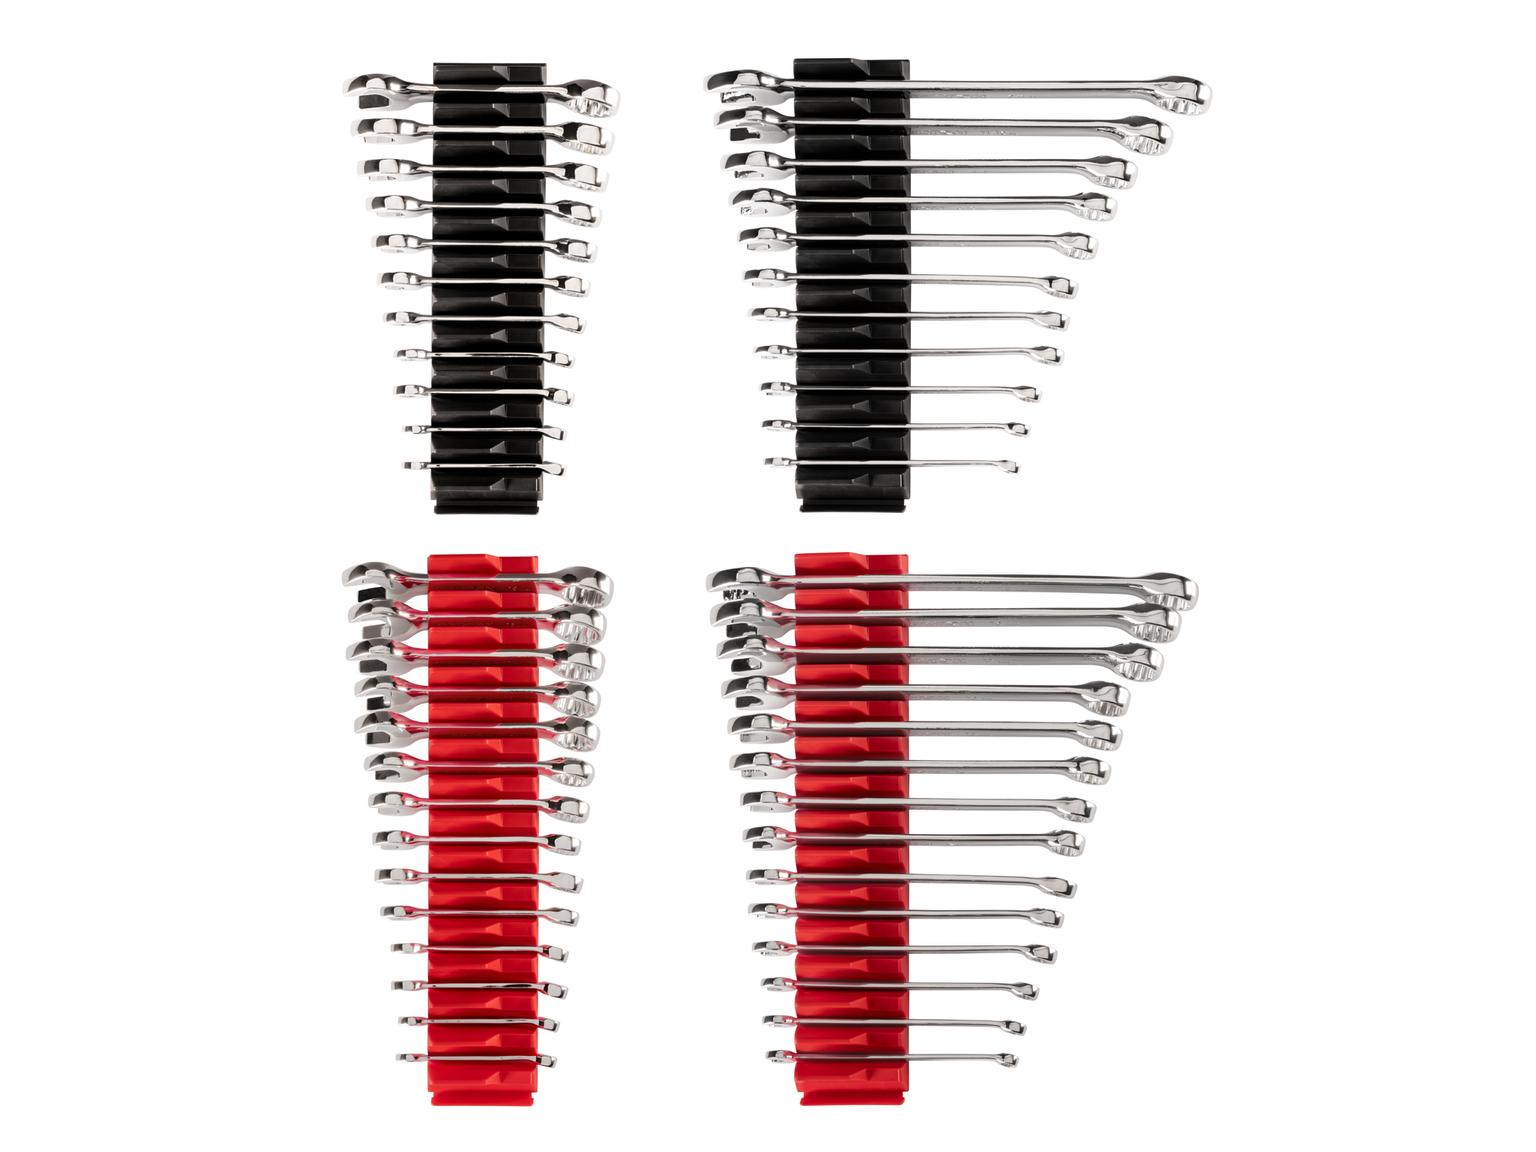 Stubby and Standard Length Combination Wrench Set, 50-Piece (Modular Slotted Organizer)